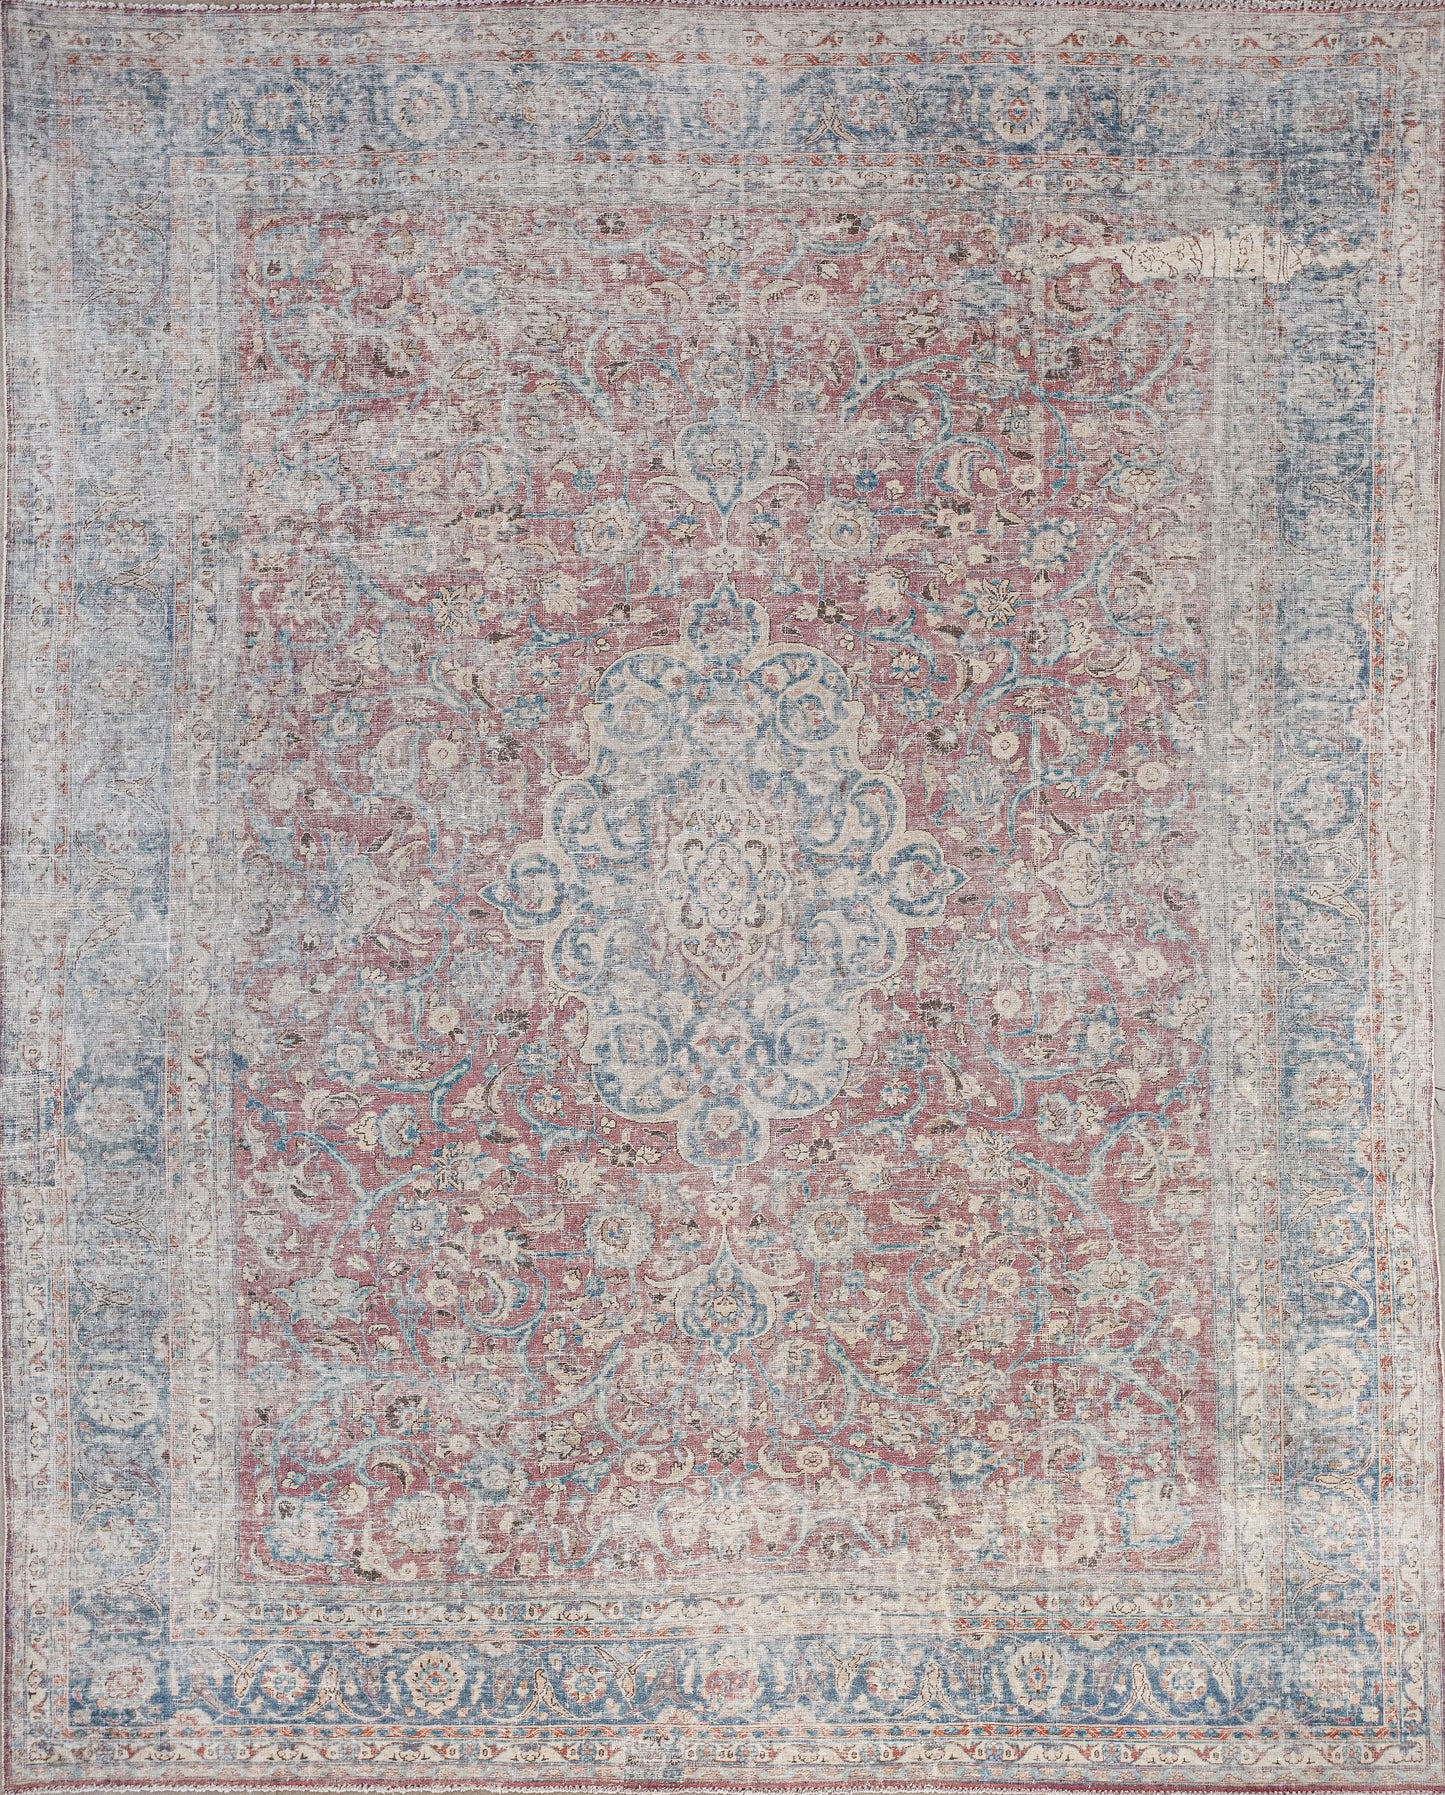 This ambitious rug was woven with psychological seriousness and powerful energy. The color palette has burgundy as the dominant tone, blue and beige for the frame and pattern, and some orange accents